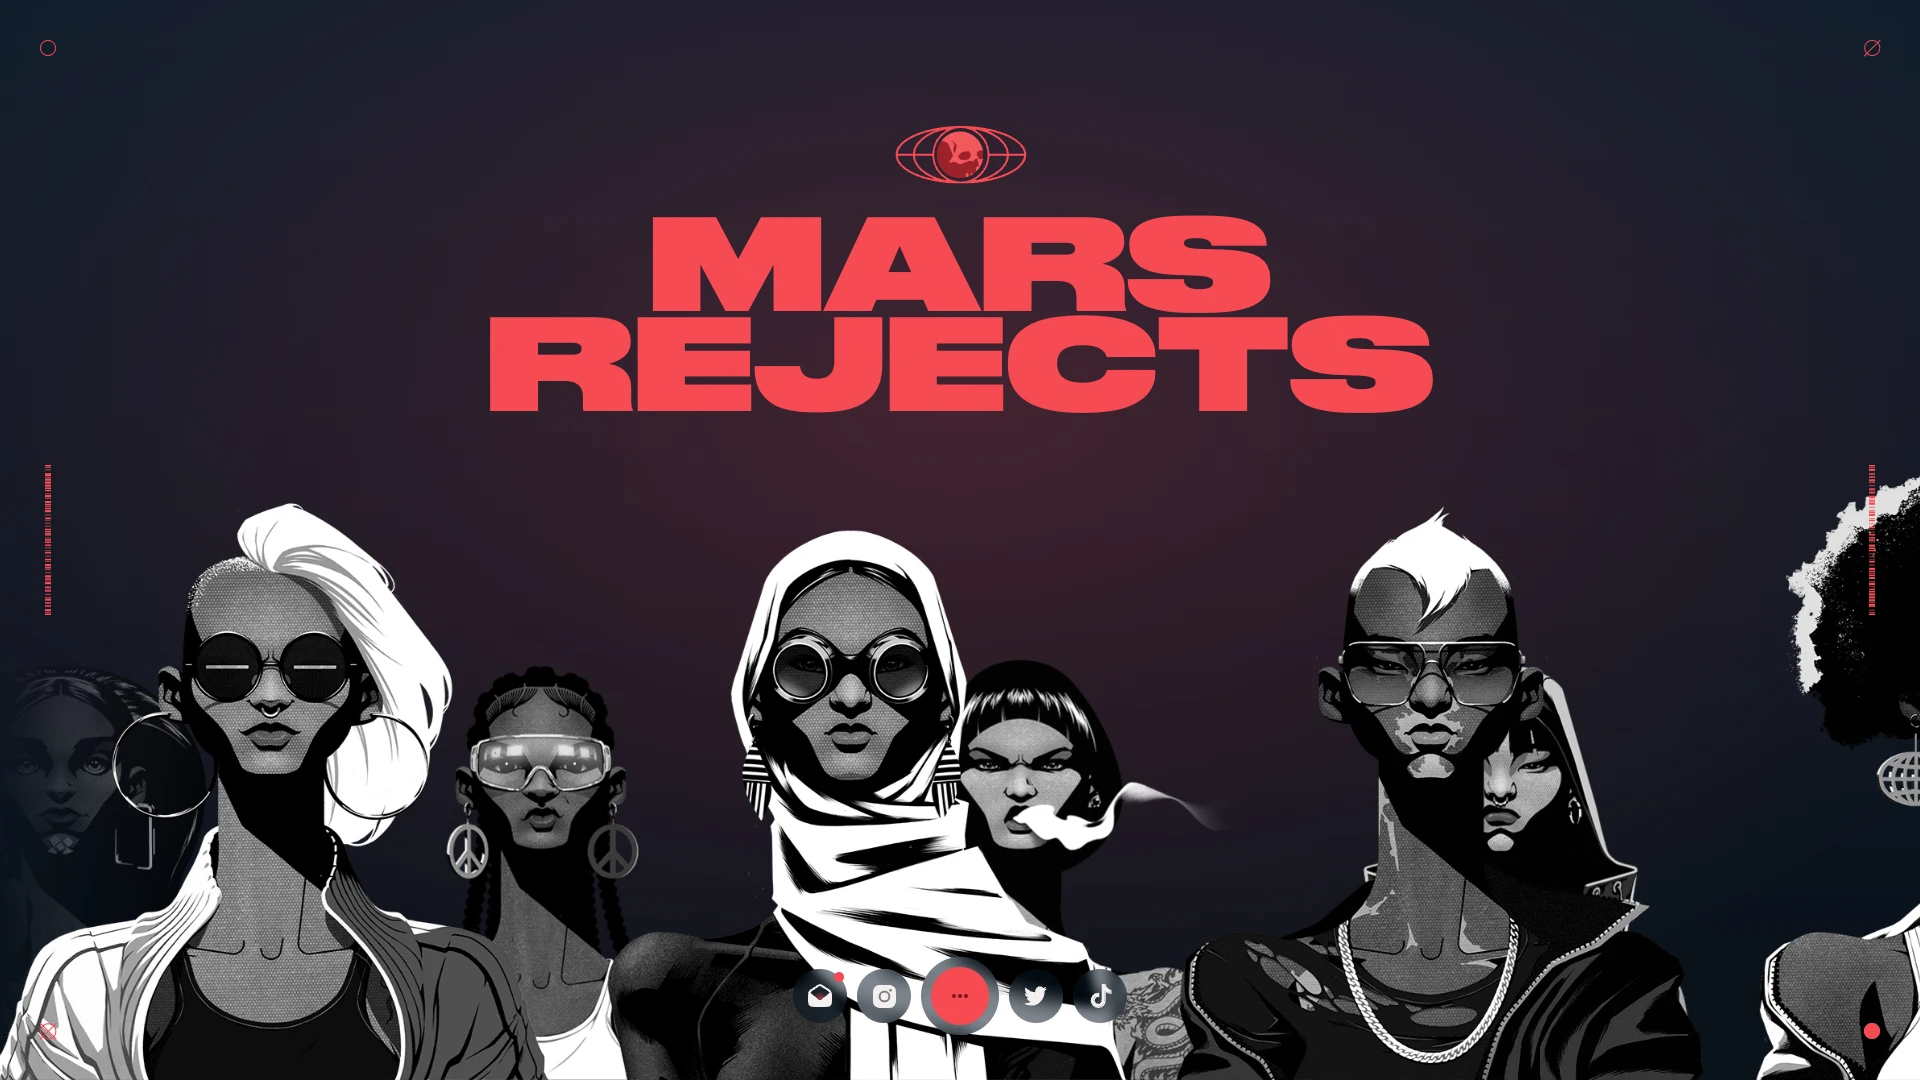 Mars Rejects